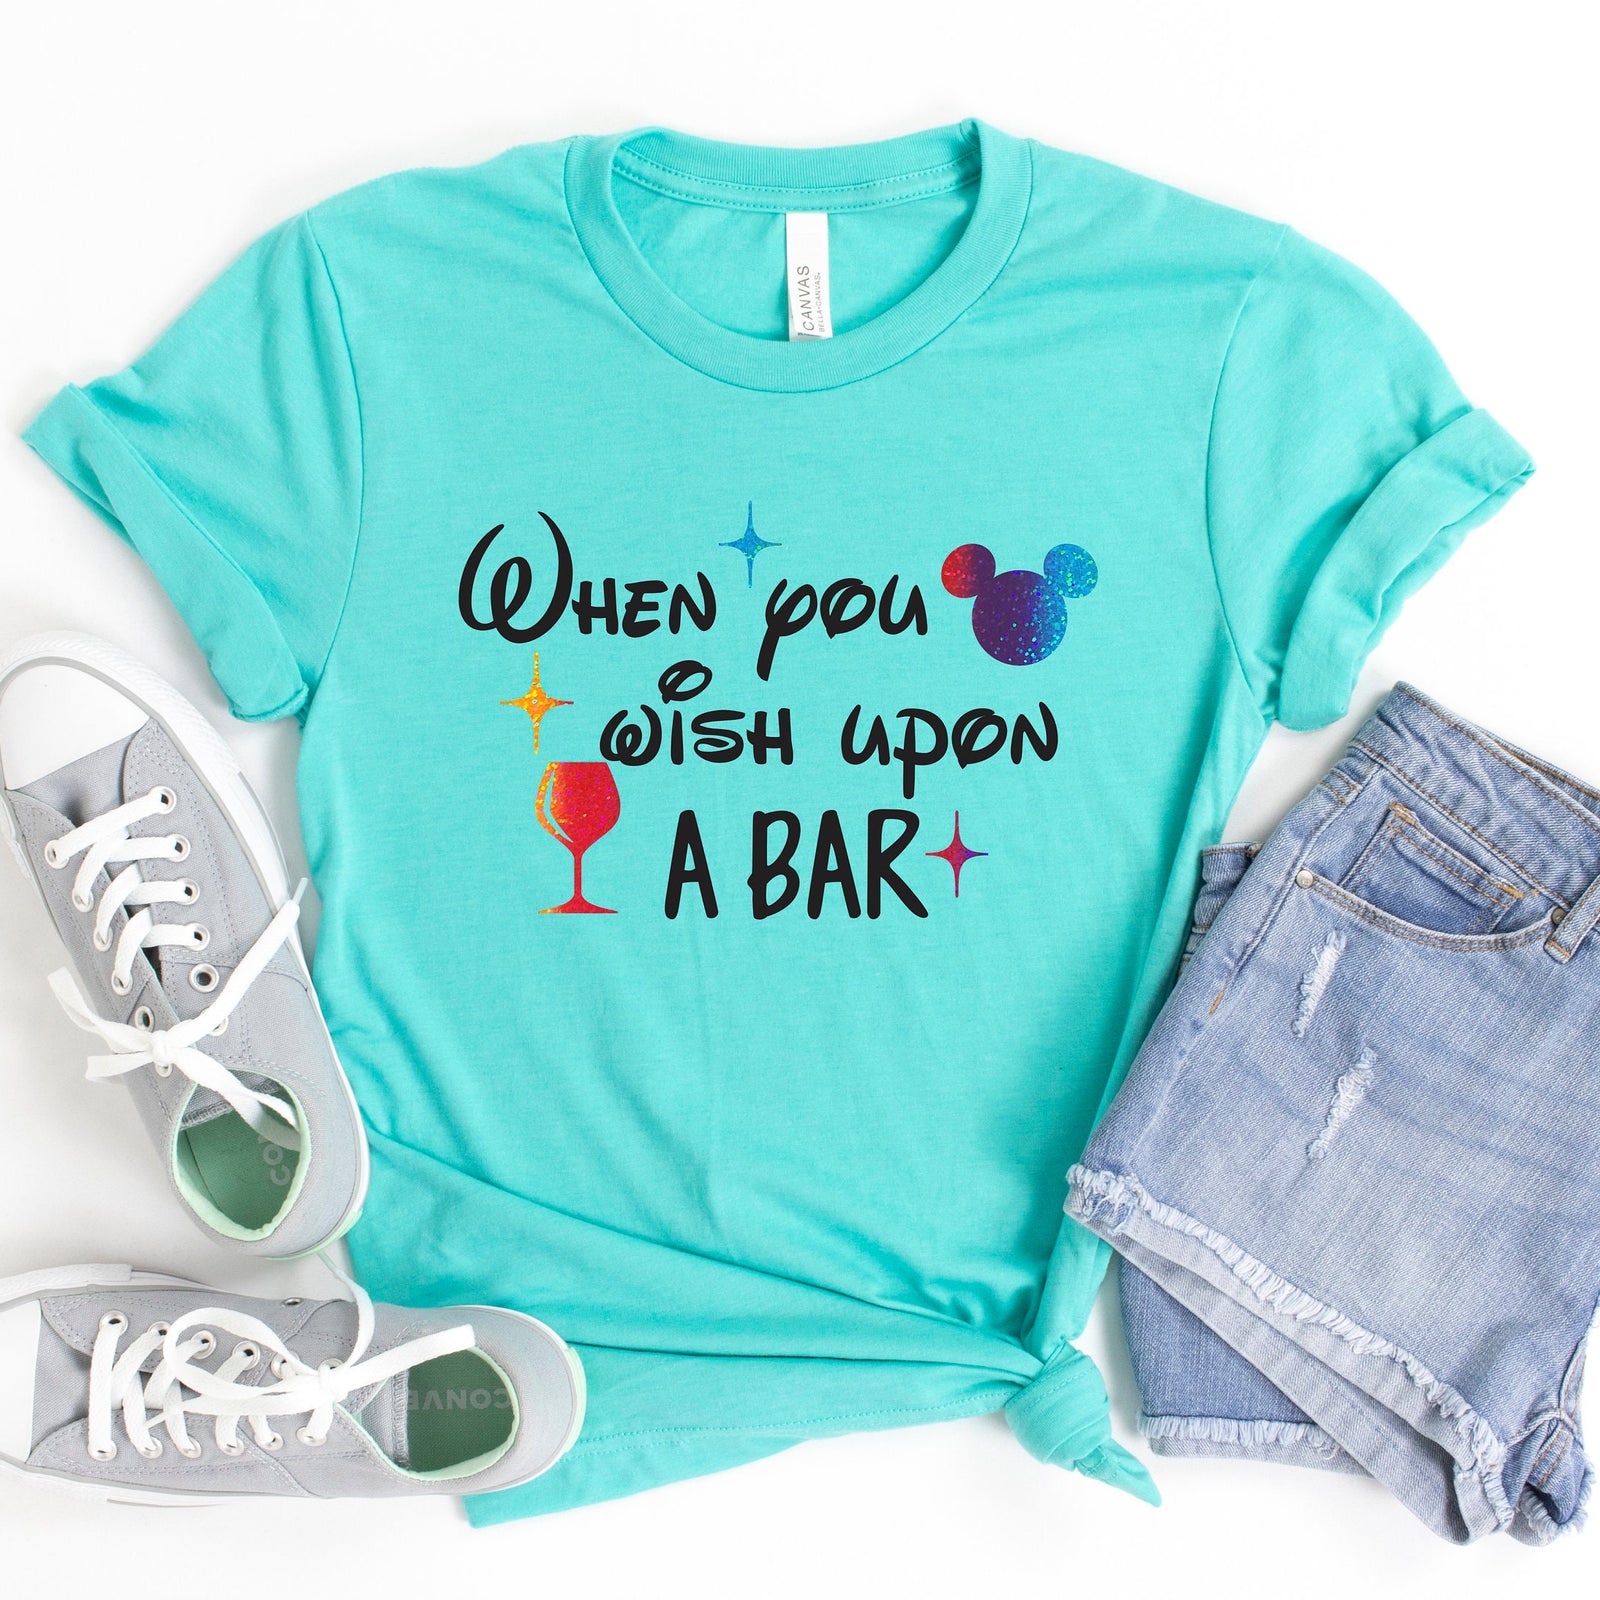 When you Wish Upon a Bar t shirt -Minnie t shirt- Minnie Drinking Shirt - Epcot Food and Wine Festival